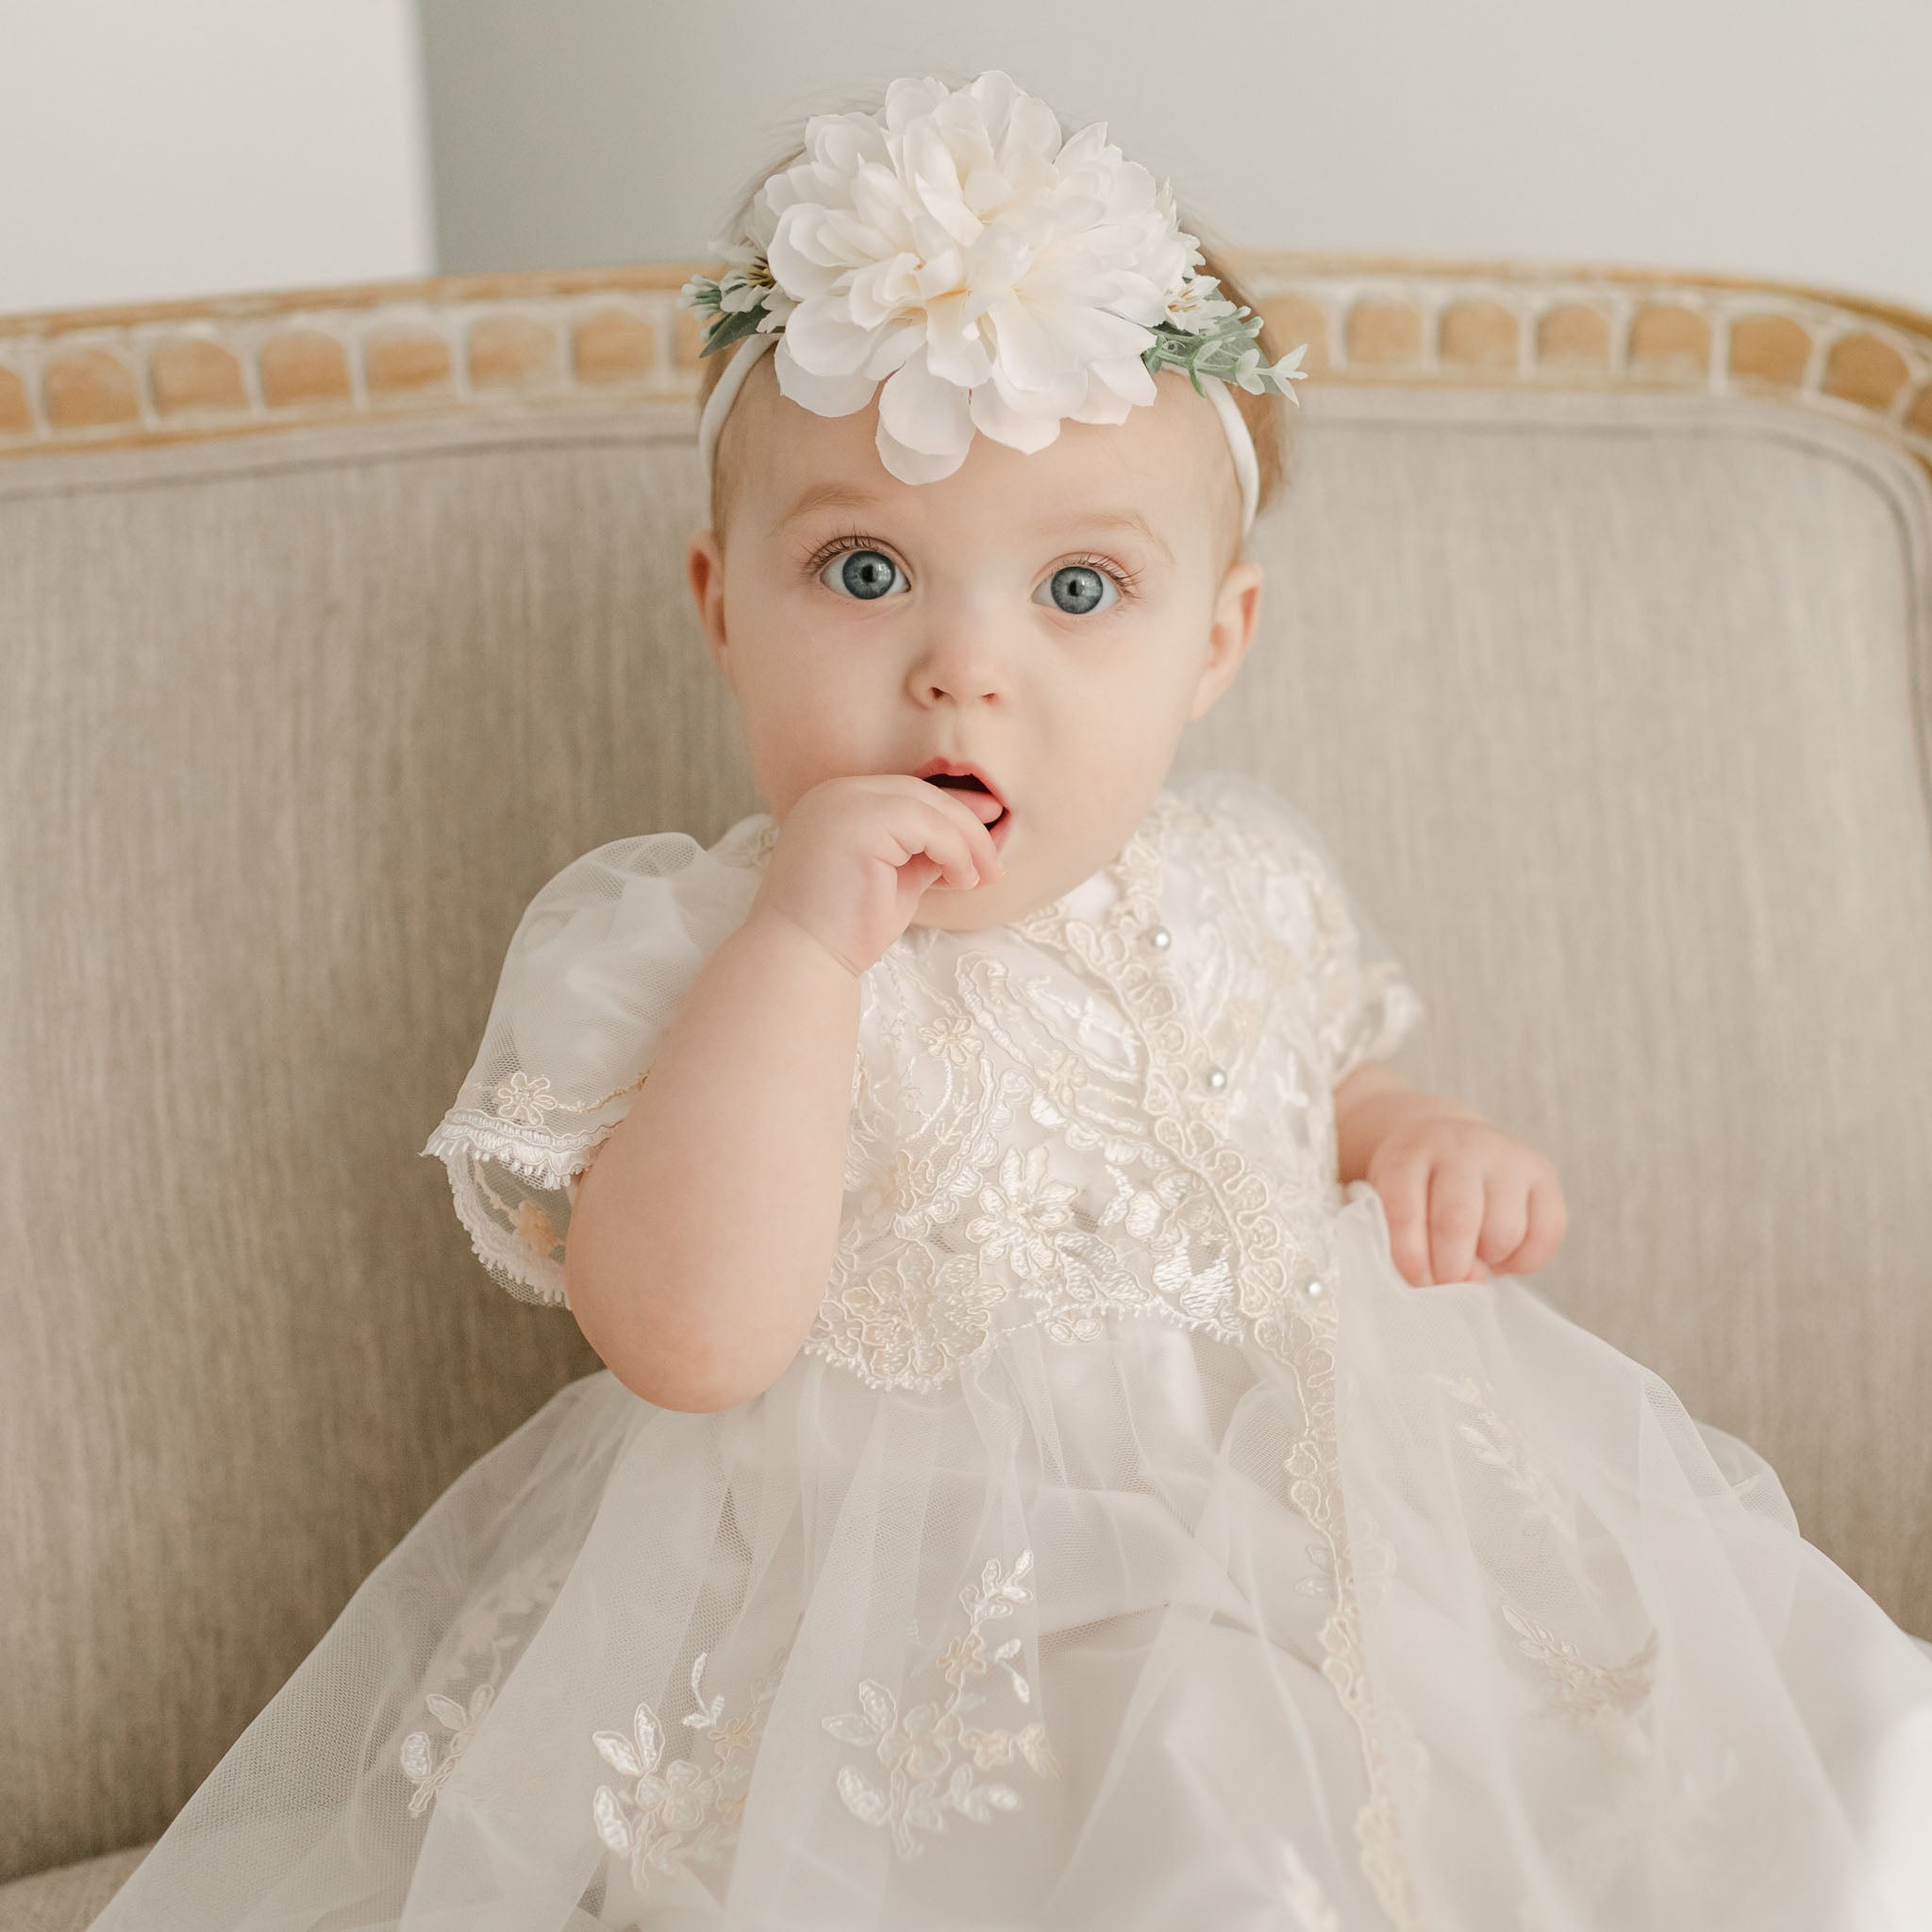 Christening Gowns – A N A G R A S S I A